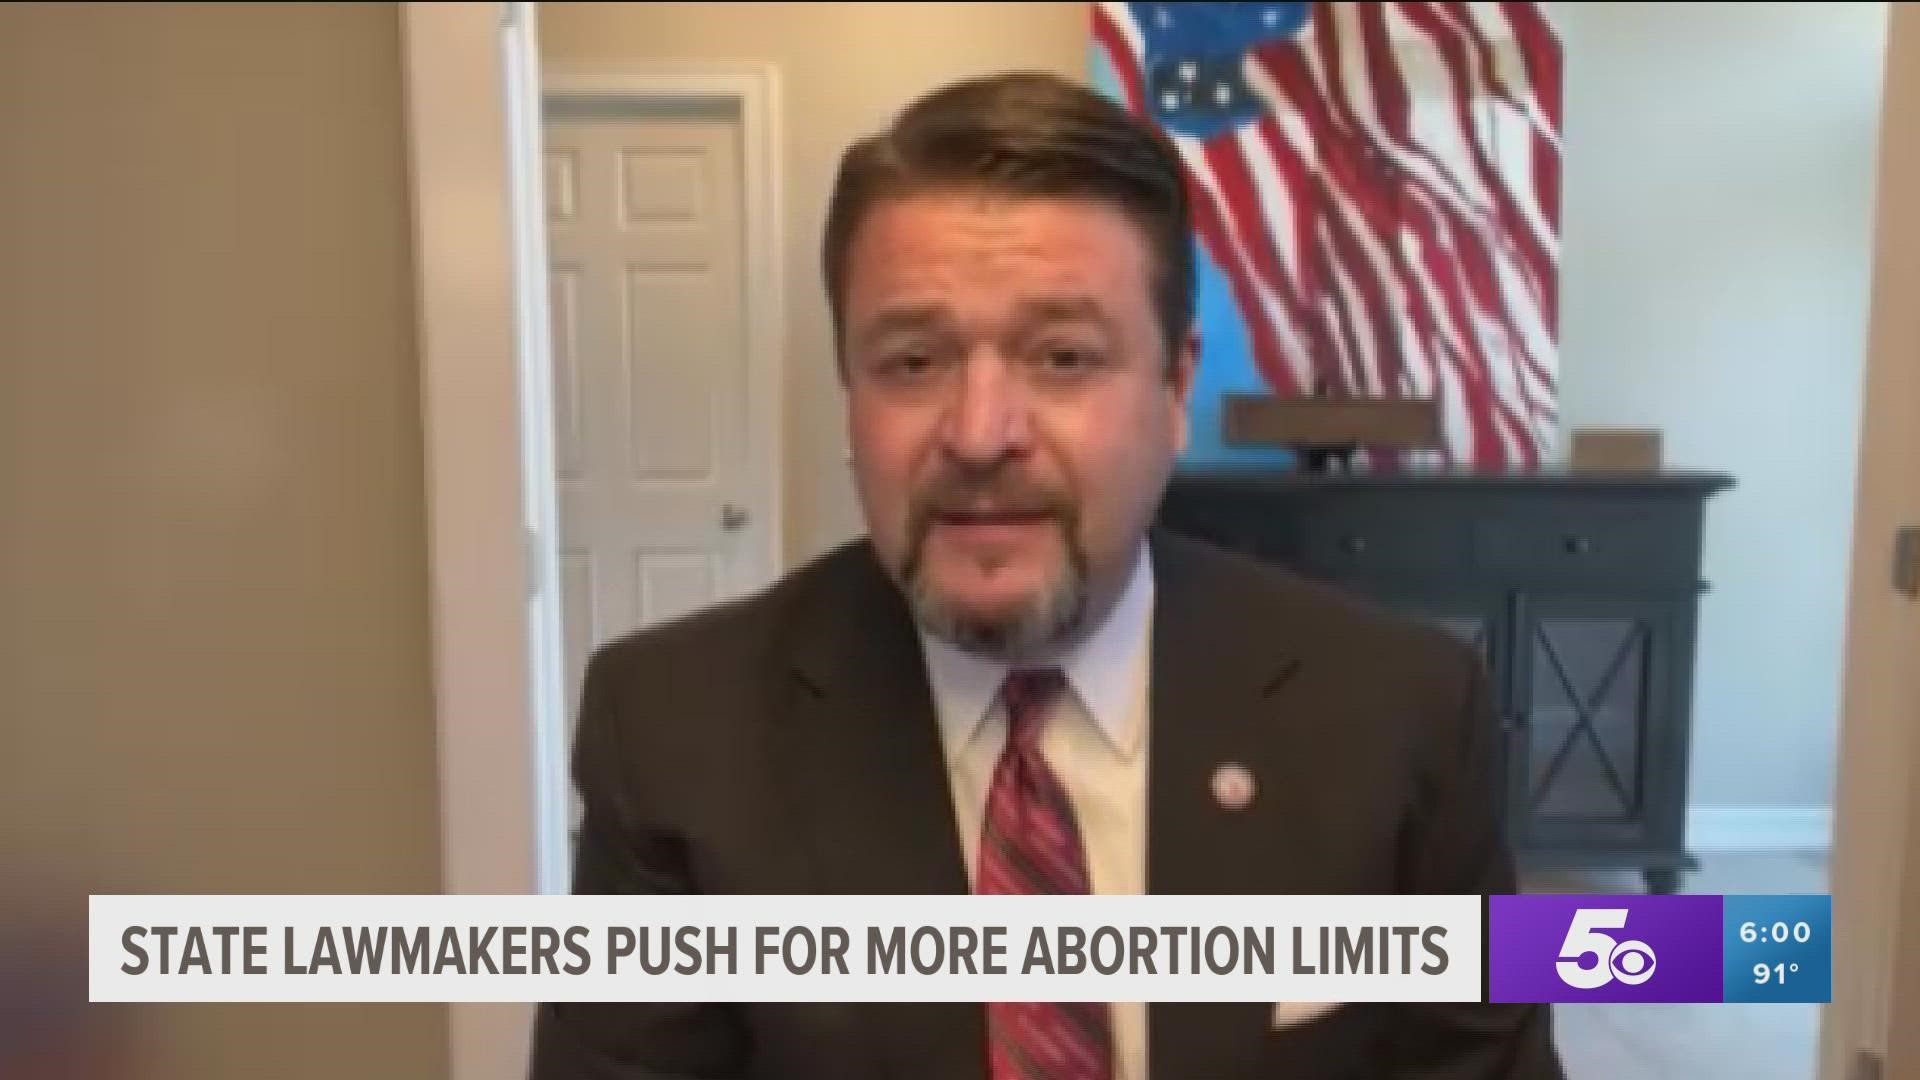 Senator Jason Rapert and the National Association of Christian lawmakers are pushing for legislation to prohibit the crossing of state lines to receive abortions.